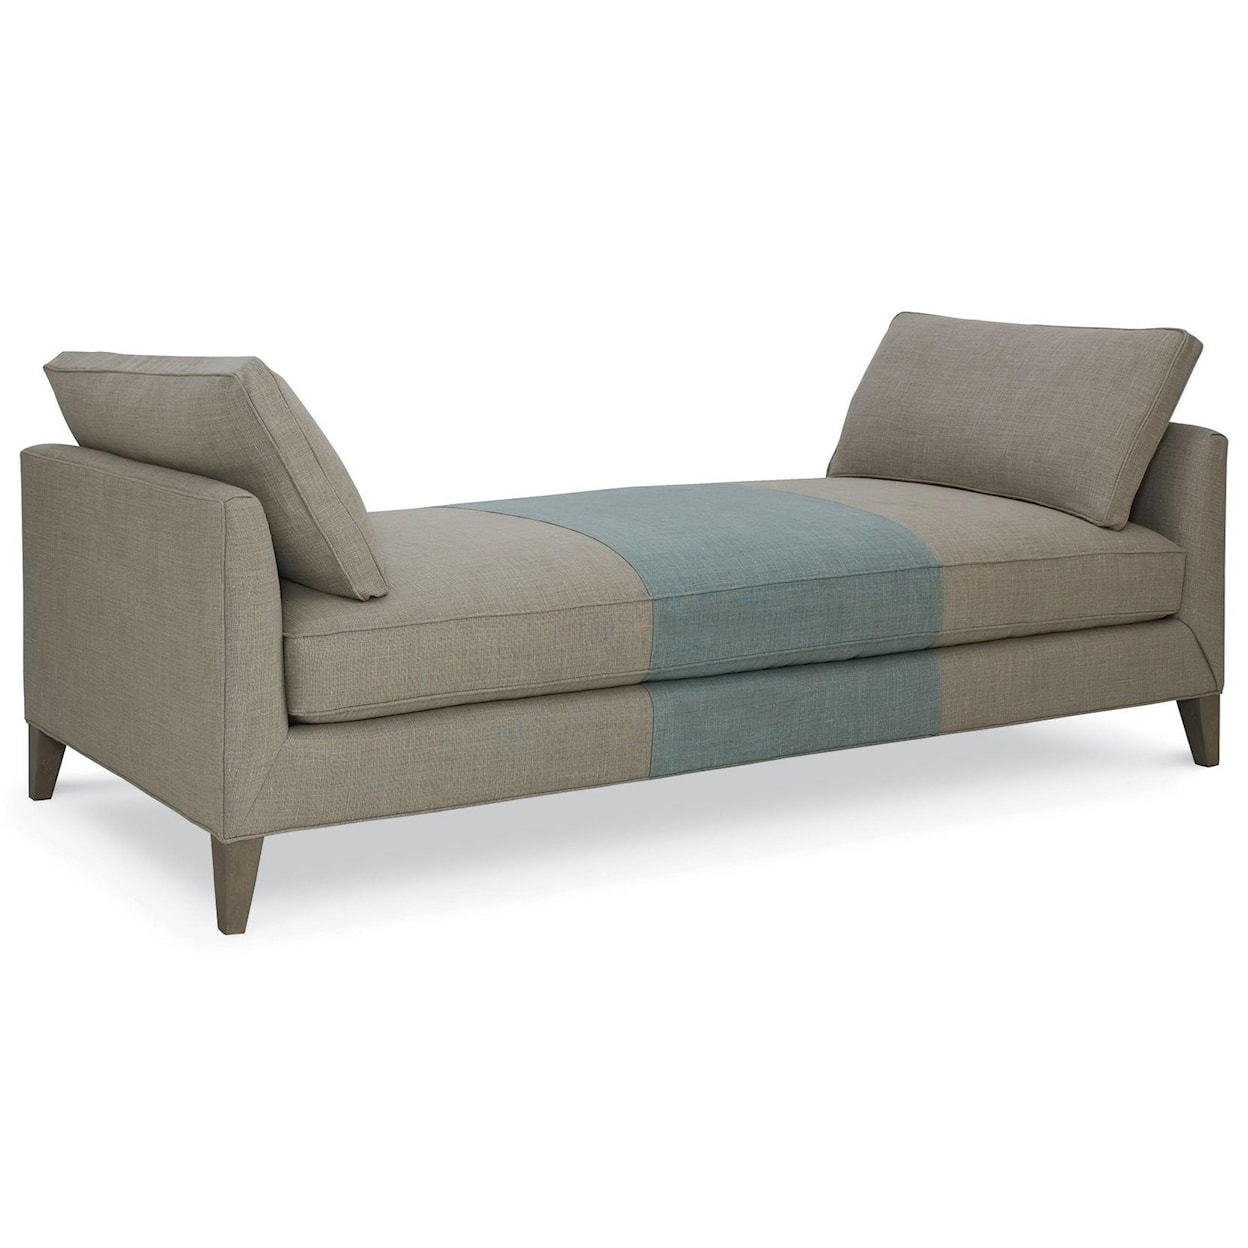 C.R. Laine Daybeds Liv Daybed